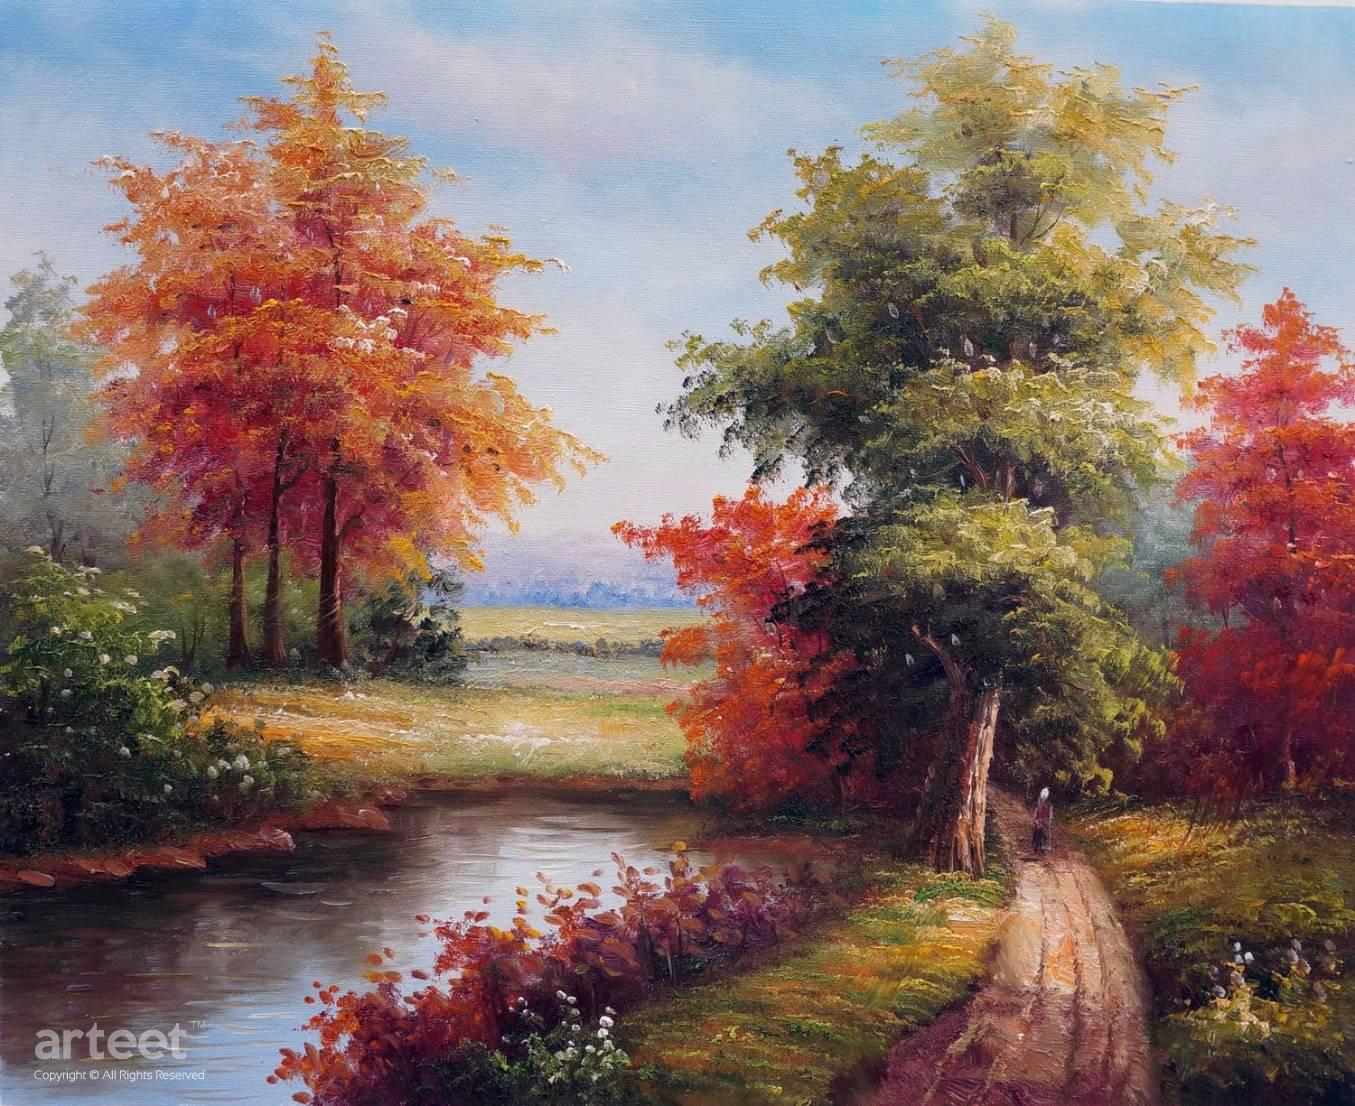 Under the Elms Art Paintings for Sale, Online Gallery